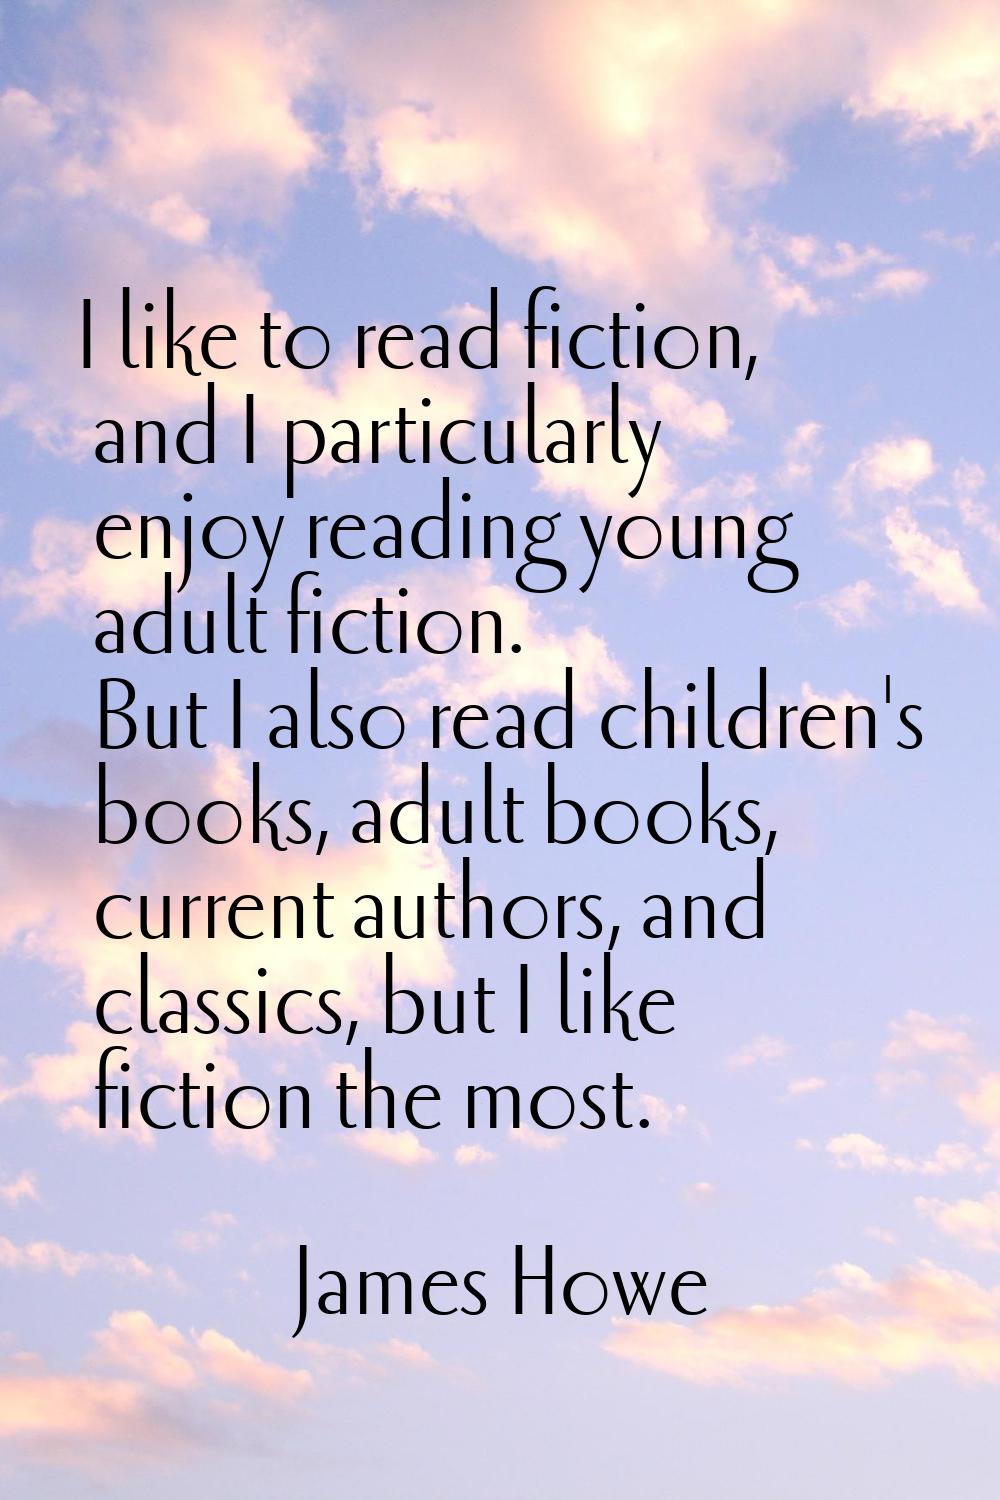 I like to read fiction, and I particularly enjoy reading young adult fiction. But I also read child